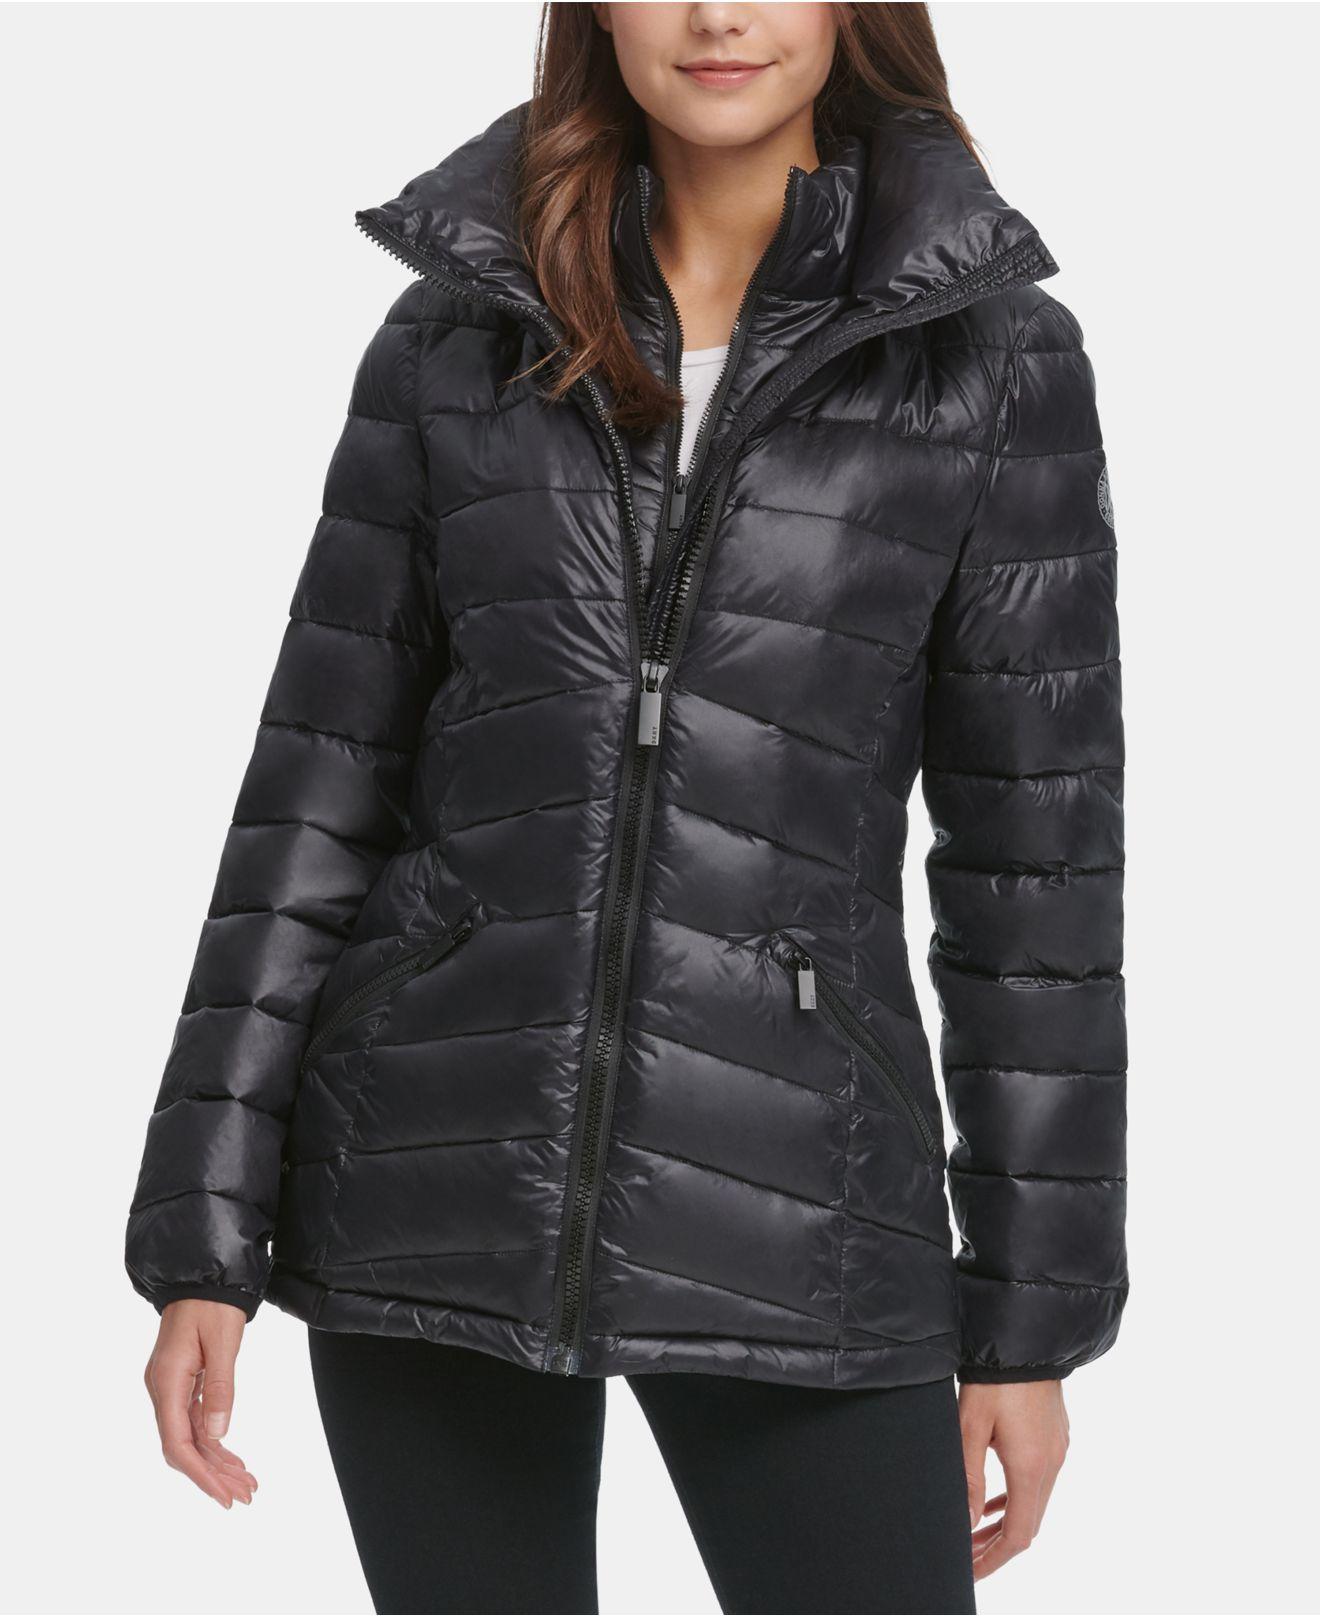 DKNY Synthetic Hooded Packable Down Puffer Coat in Black - Lyst